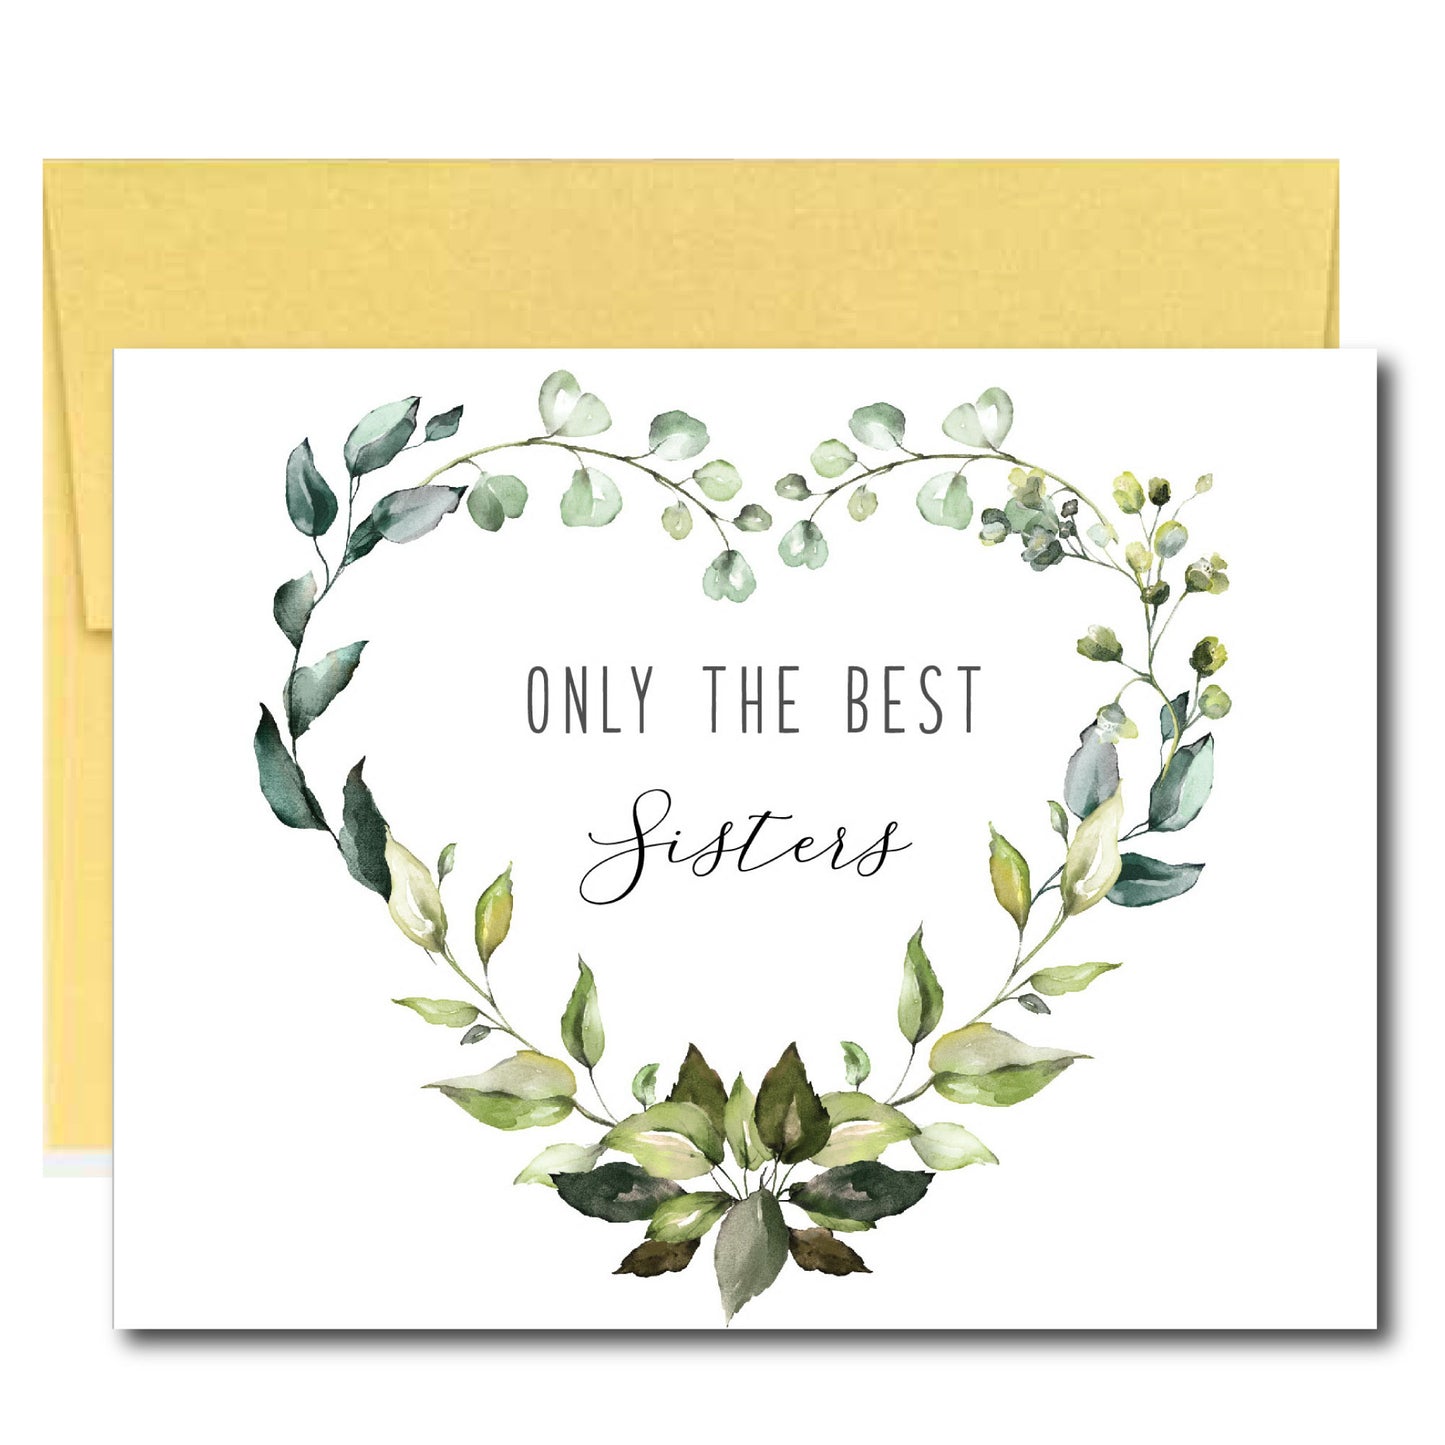 Greenery Pregnancy Announcement Card for Sister